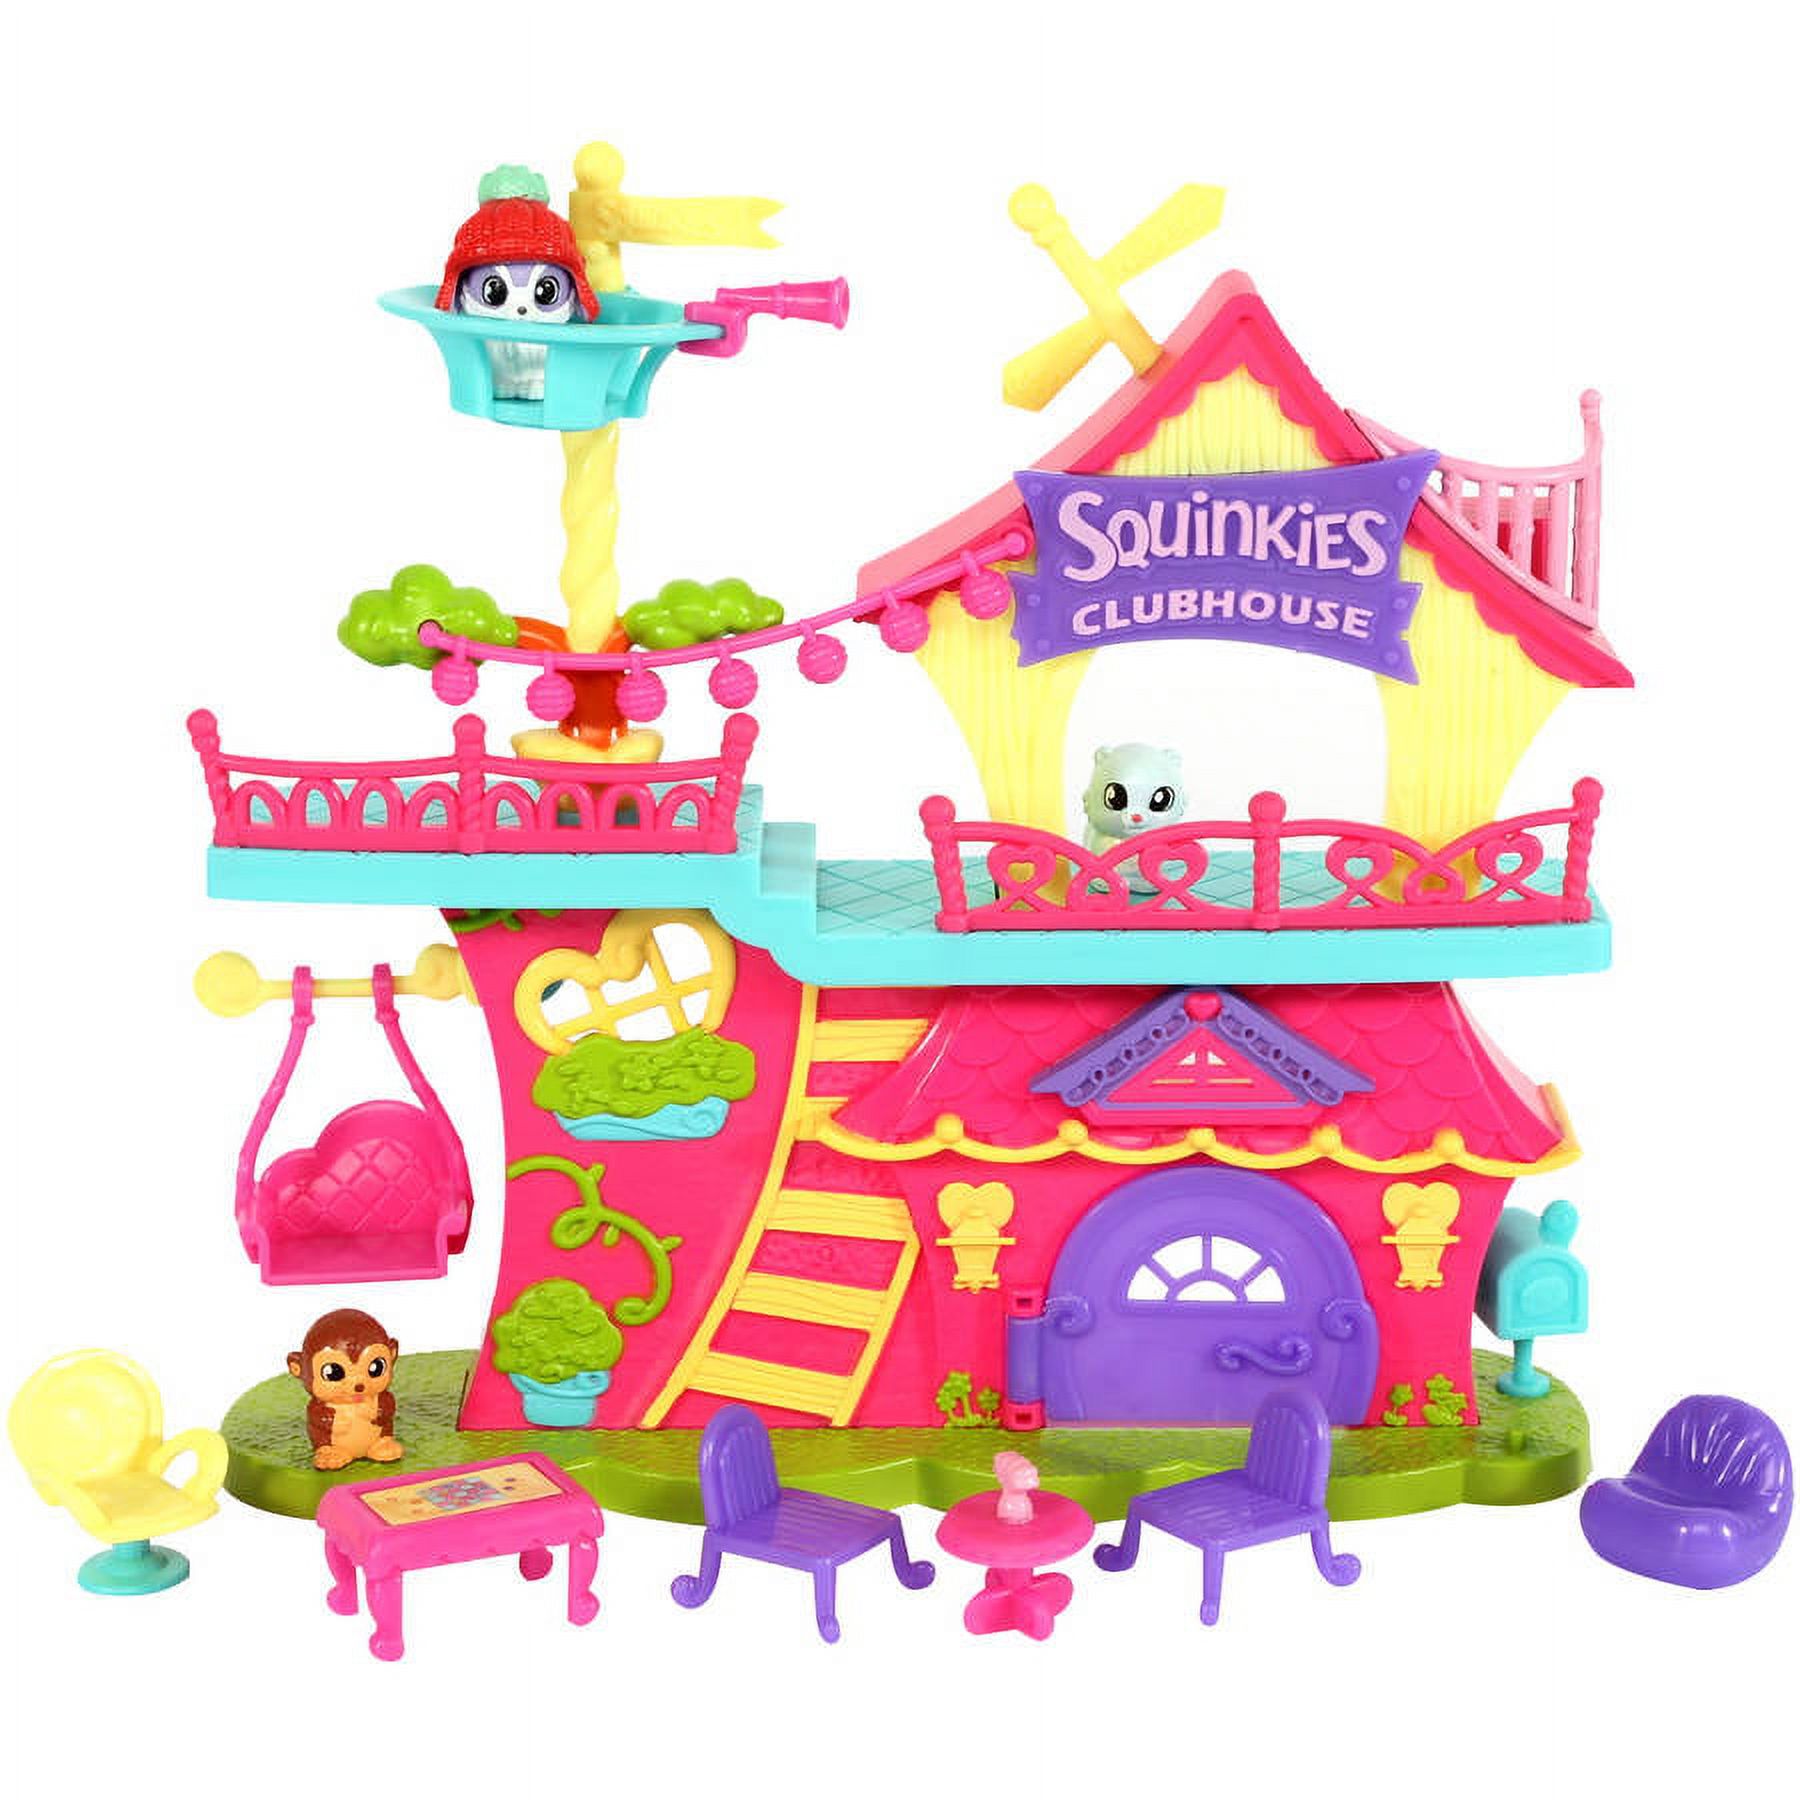 Squinkies Do Drops Squinkieville Clubhouse - image 1 of 6